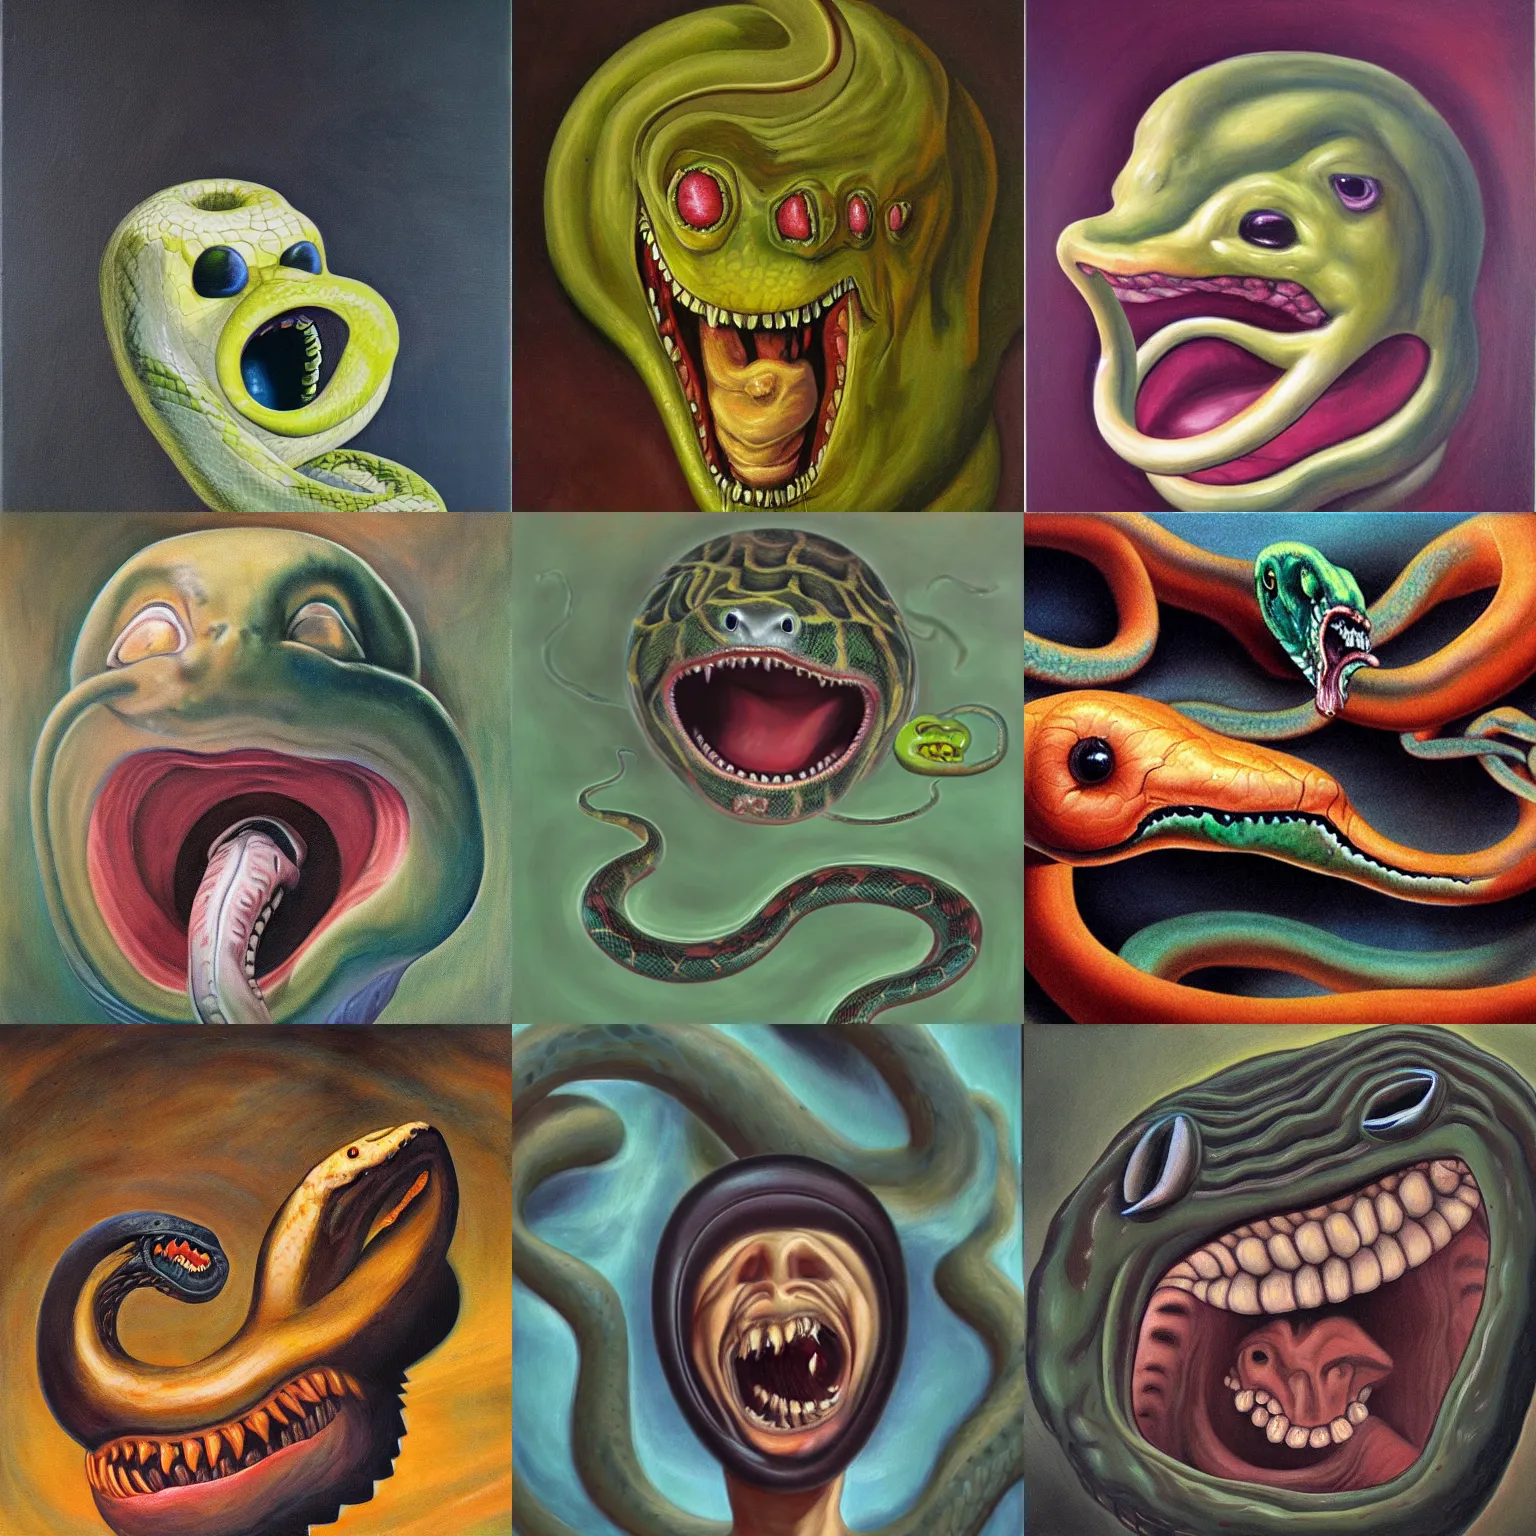 Prompt: A disembodied head screaming, snakes slithering out of its mouth, oil painting, surrealism style